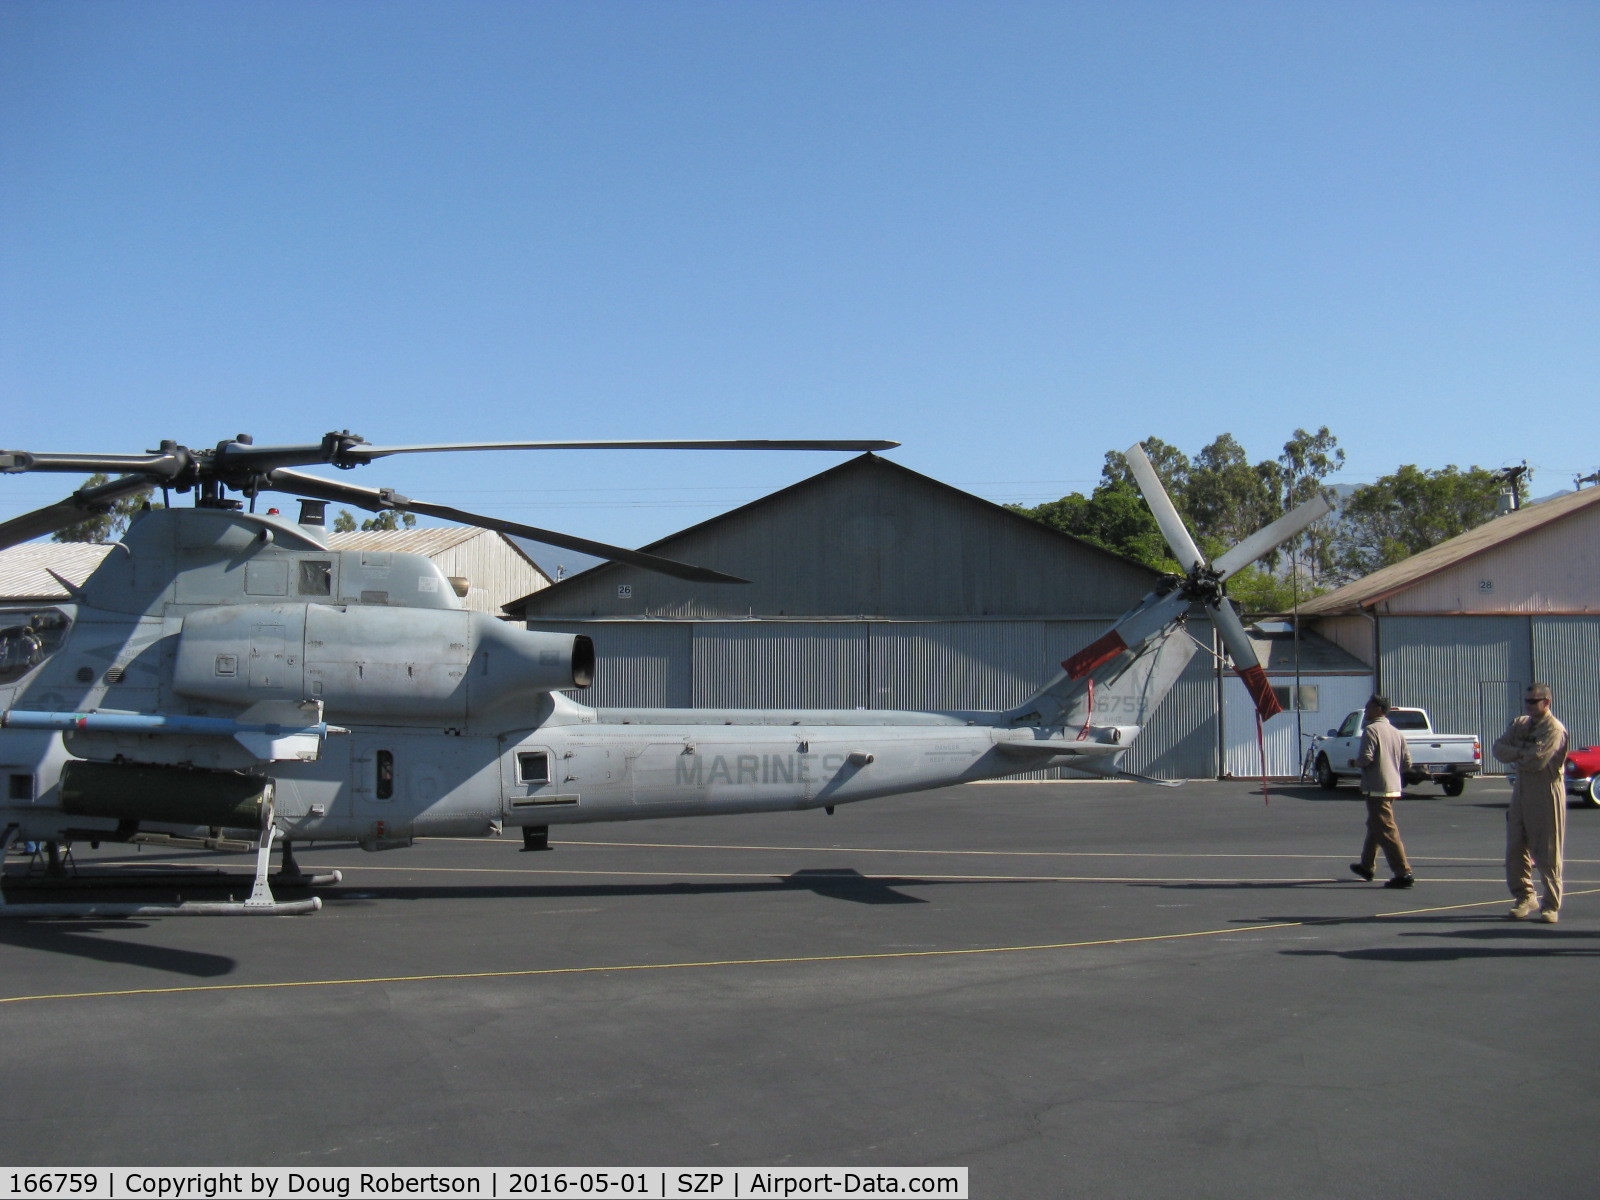 166759, 2005 Bell AH-1Z Viper C/N Not found 166759, BELL TEXTRON AH-1Z COBRA/VIPER, two General Electric T700-GE-401C/C Turboshaft rated at 1,800 shp each